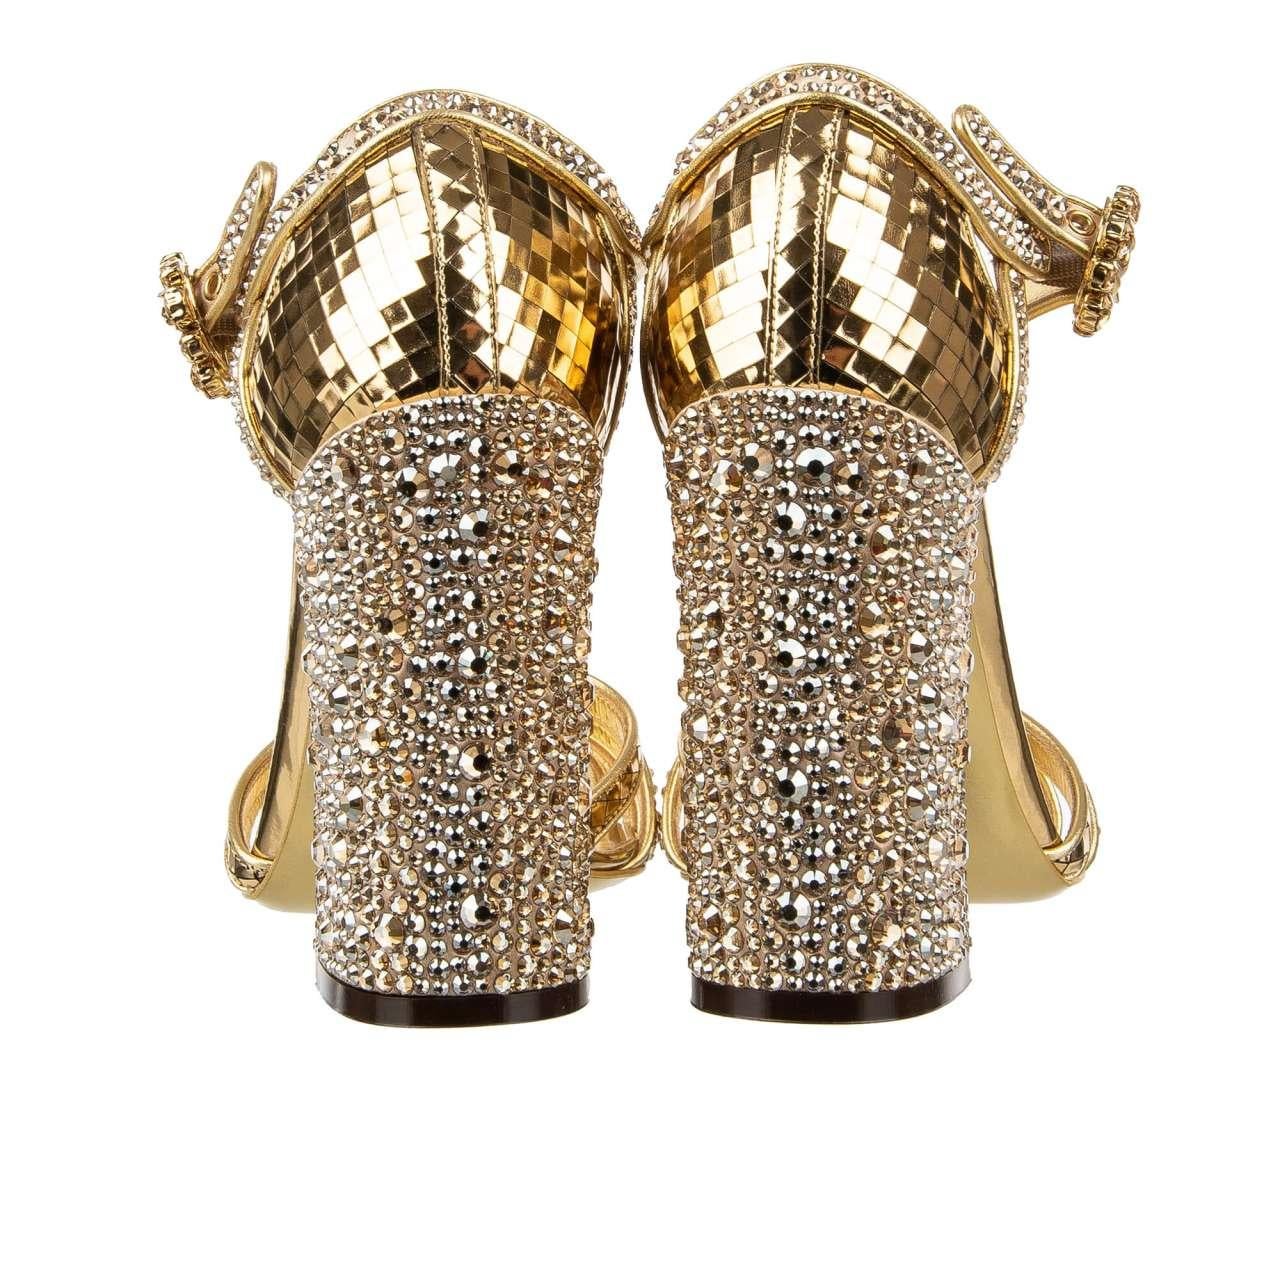 Dolce & Gabbana Disco High Heel Sandals Pumps KEIRA with Crystals Gold 40 10 For Sale 1